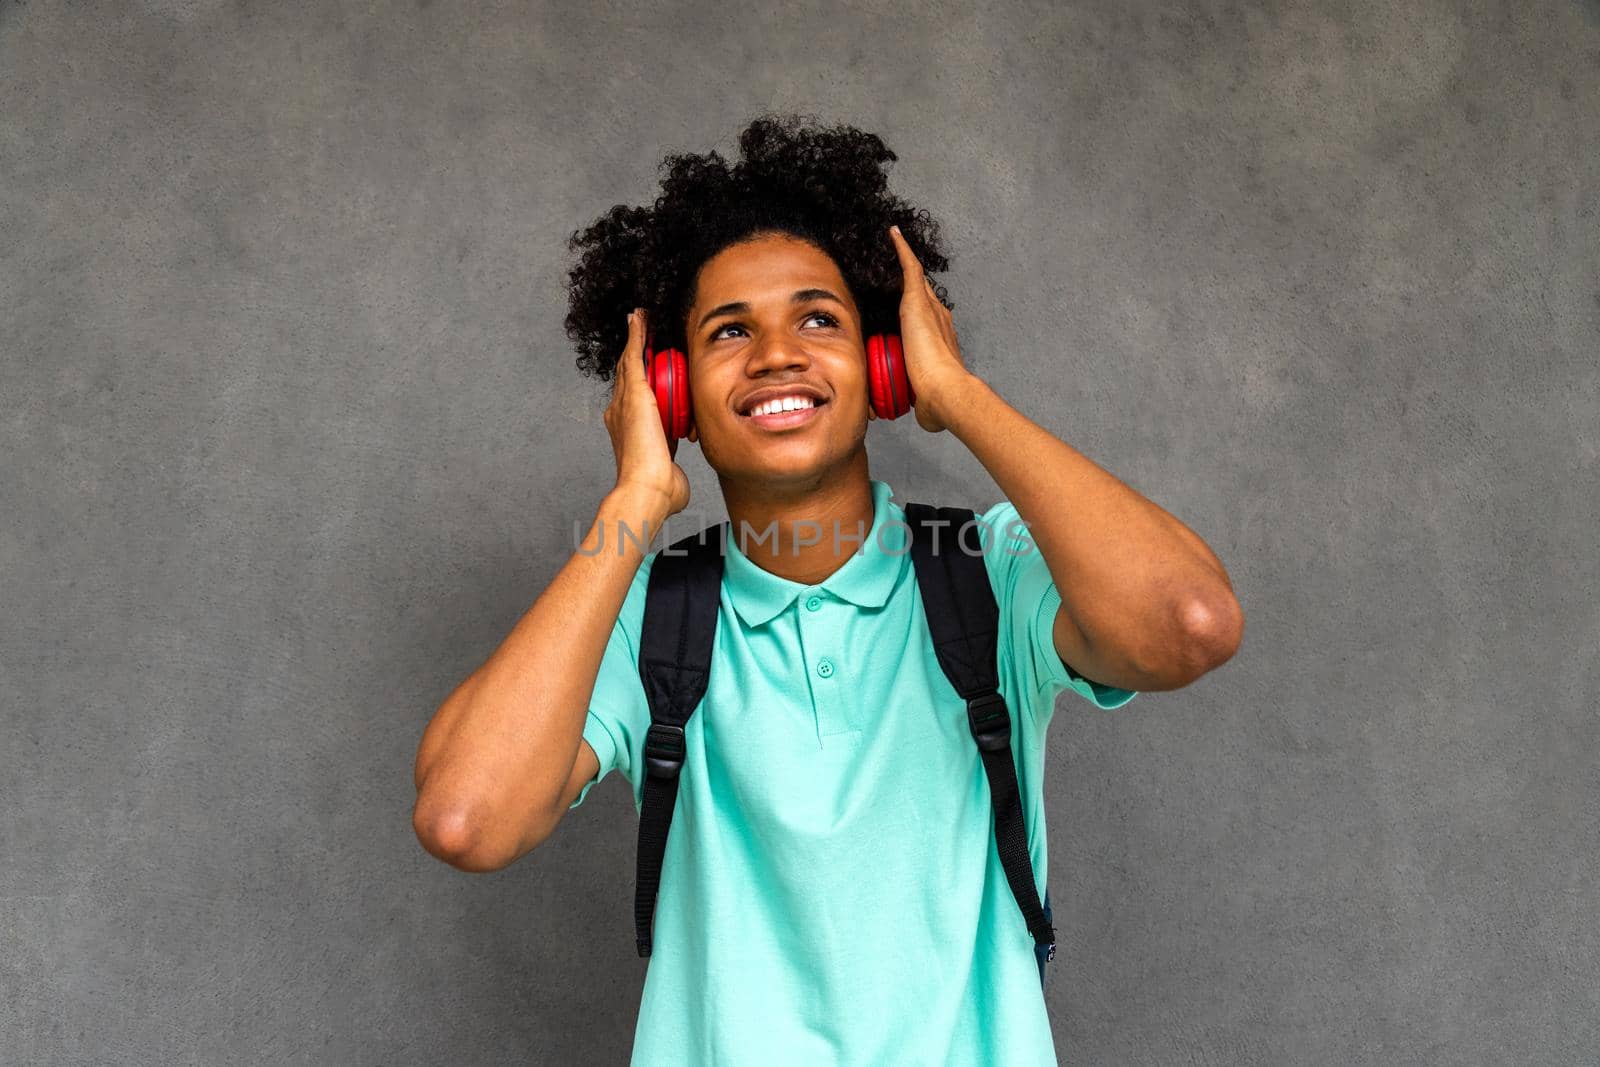 African American male teenager listens to music with headphones. Lifestyle concept.